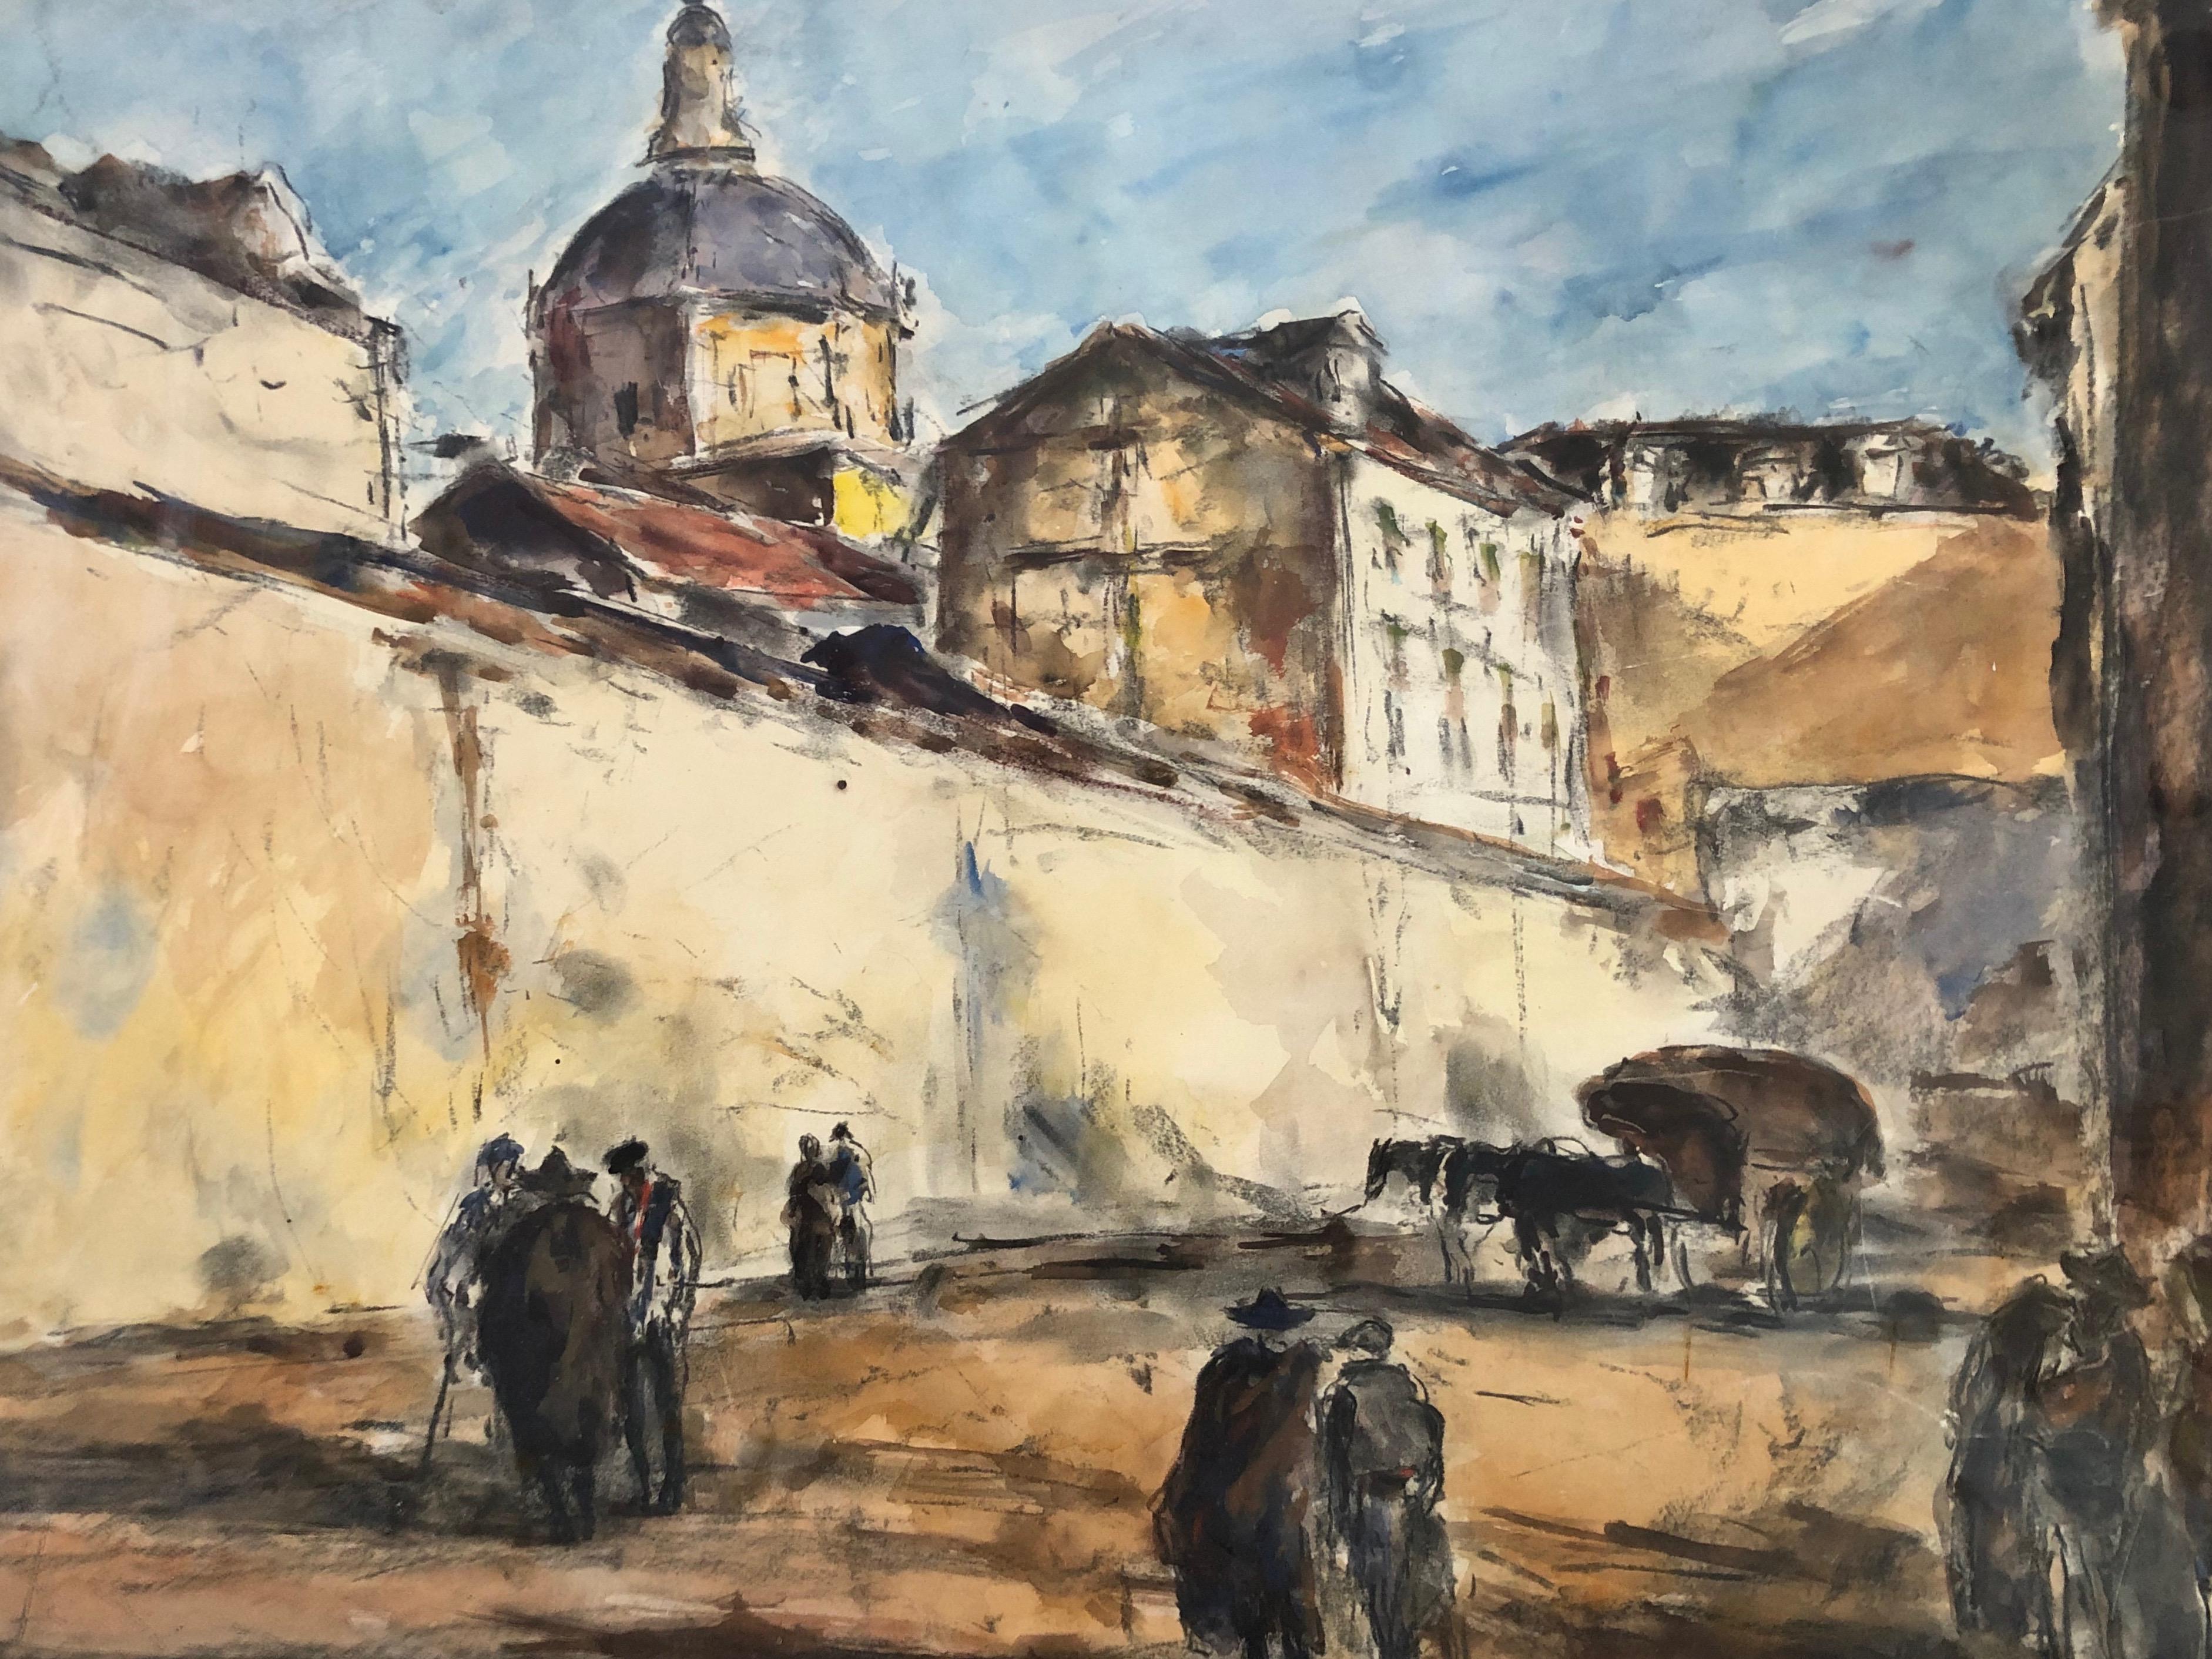 Arturo Souto Feijoo (1901-1964) City Walls w/ Figures Original Mixed Media c.1950

Original pastel, watercolor and charcoal on paper. Housed in a simple frame. He has auction results for watercolors over $9000.

The mat and backboard are lightly